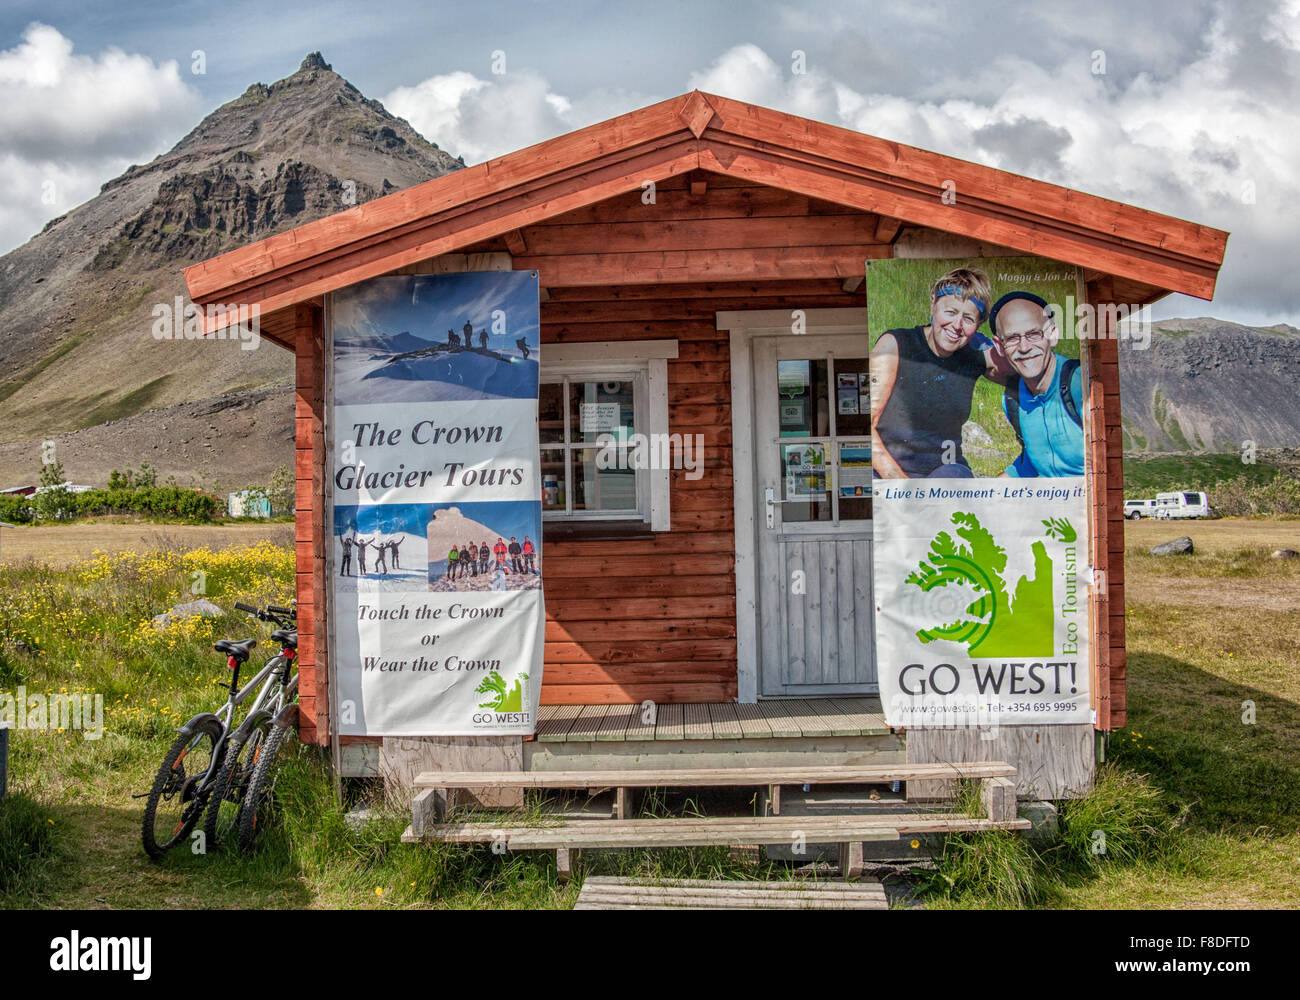 Snaefellsnes Peninsula, Iceland. 30th July, 2015. A wooden cabin with posters advertising tours of Iceland beneath the pyramidal shaped Mt. Stapafell volcano in Arnarstapi, West Iceland, on the Snaefellsnes Peninsula.Iceland has become a favorite tourist destination. © Arnold Drapkin/ZUMA Wire/Alamy Live News Stock Photo